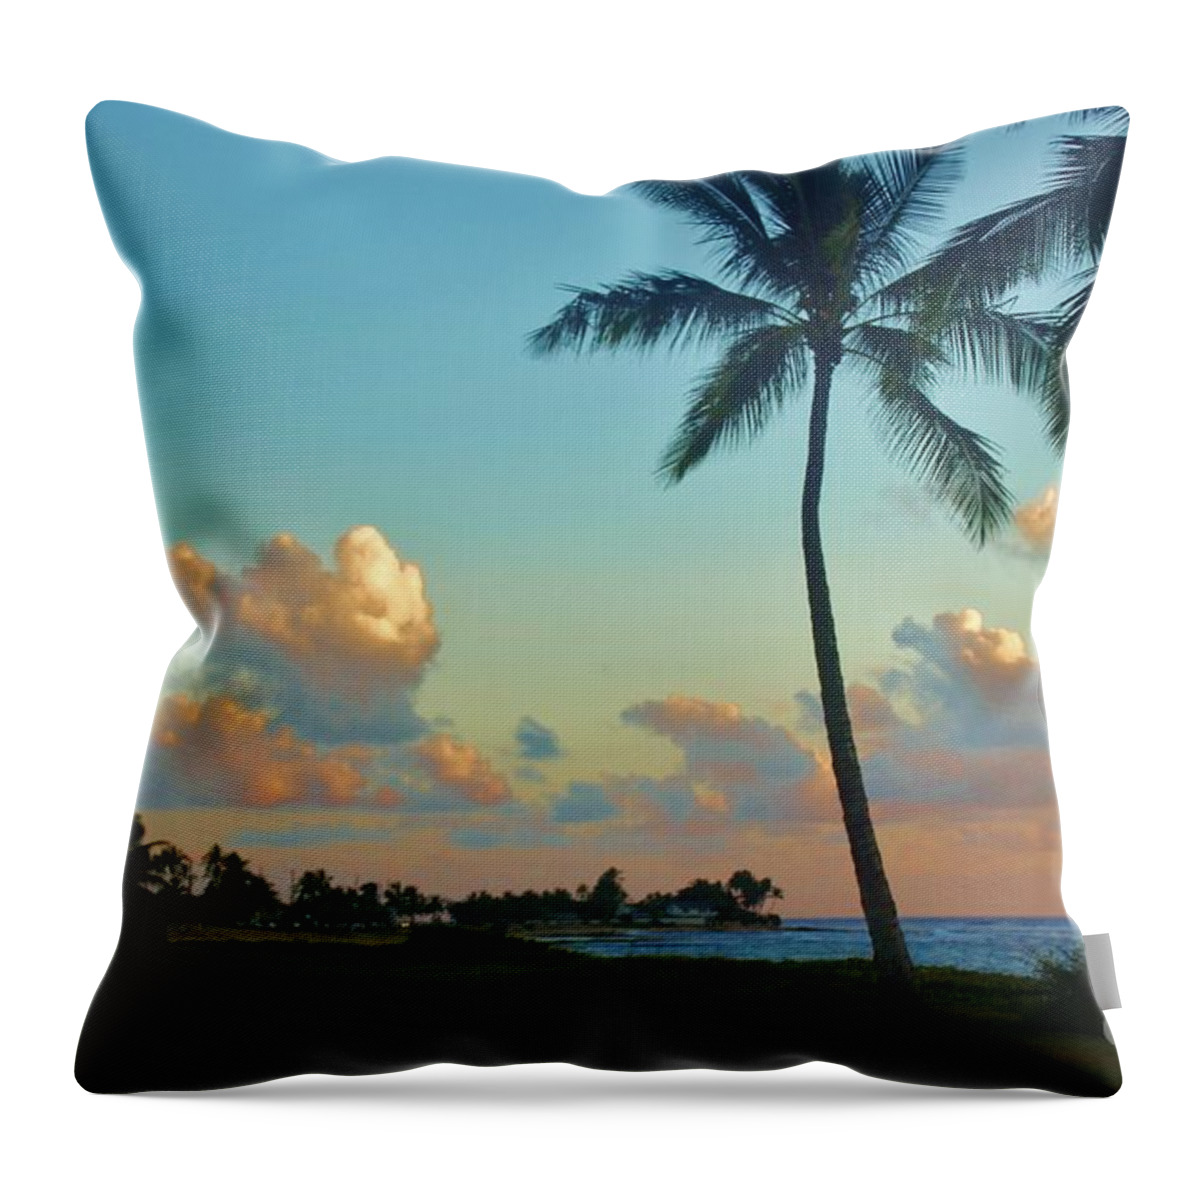 Tropical View Throw Pillow featuring the photograph Tropical View by Craig Wood